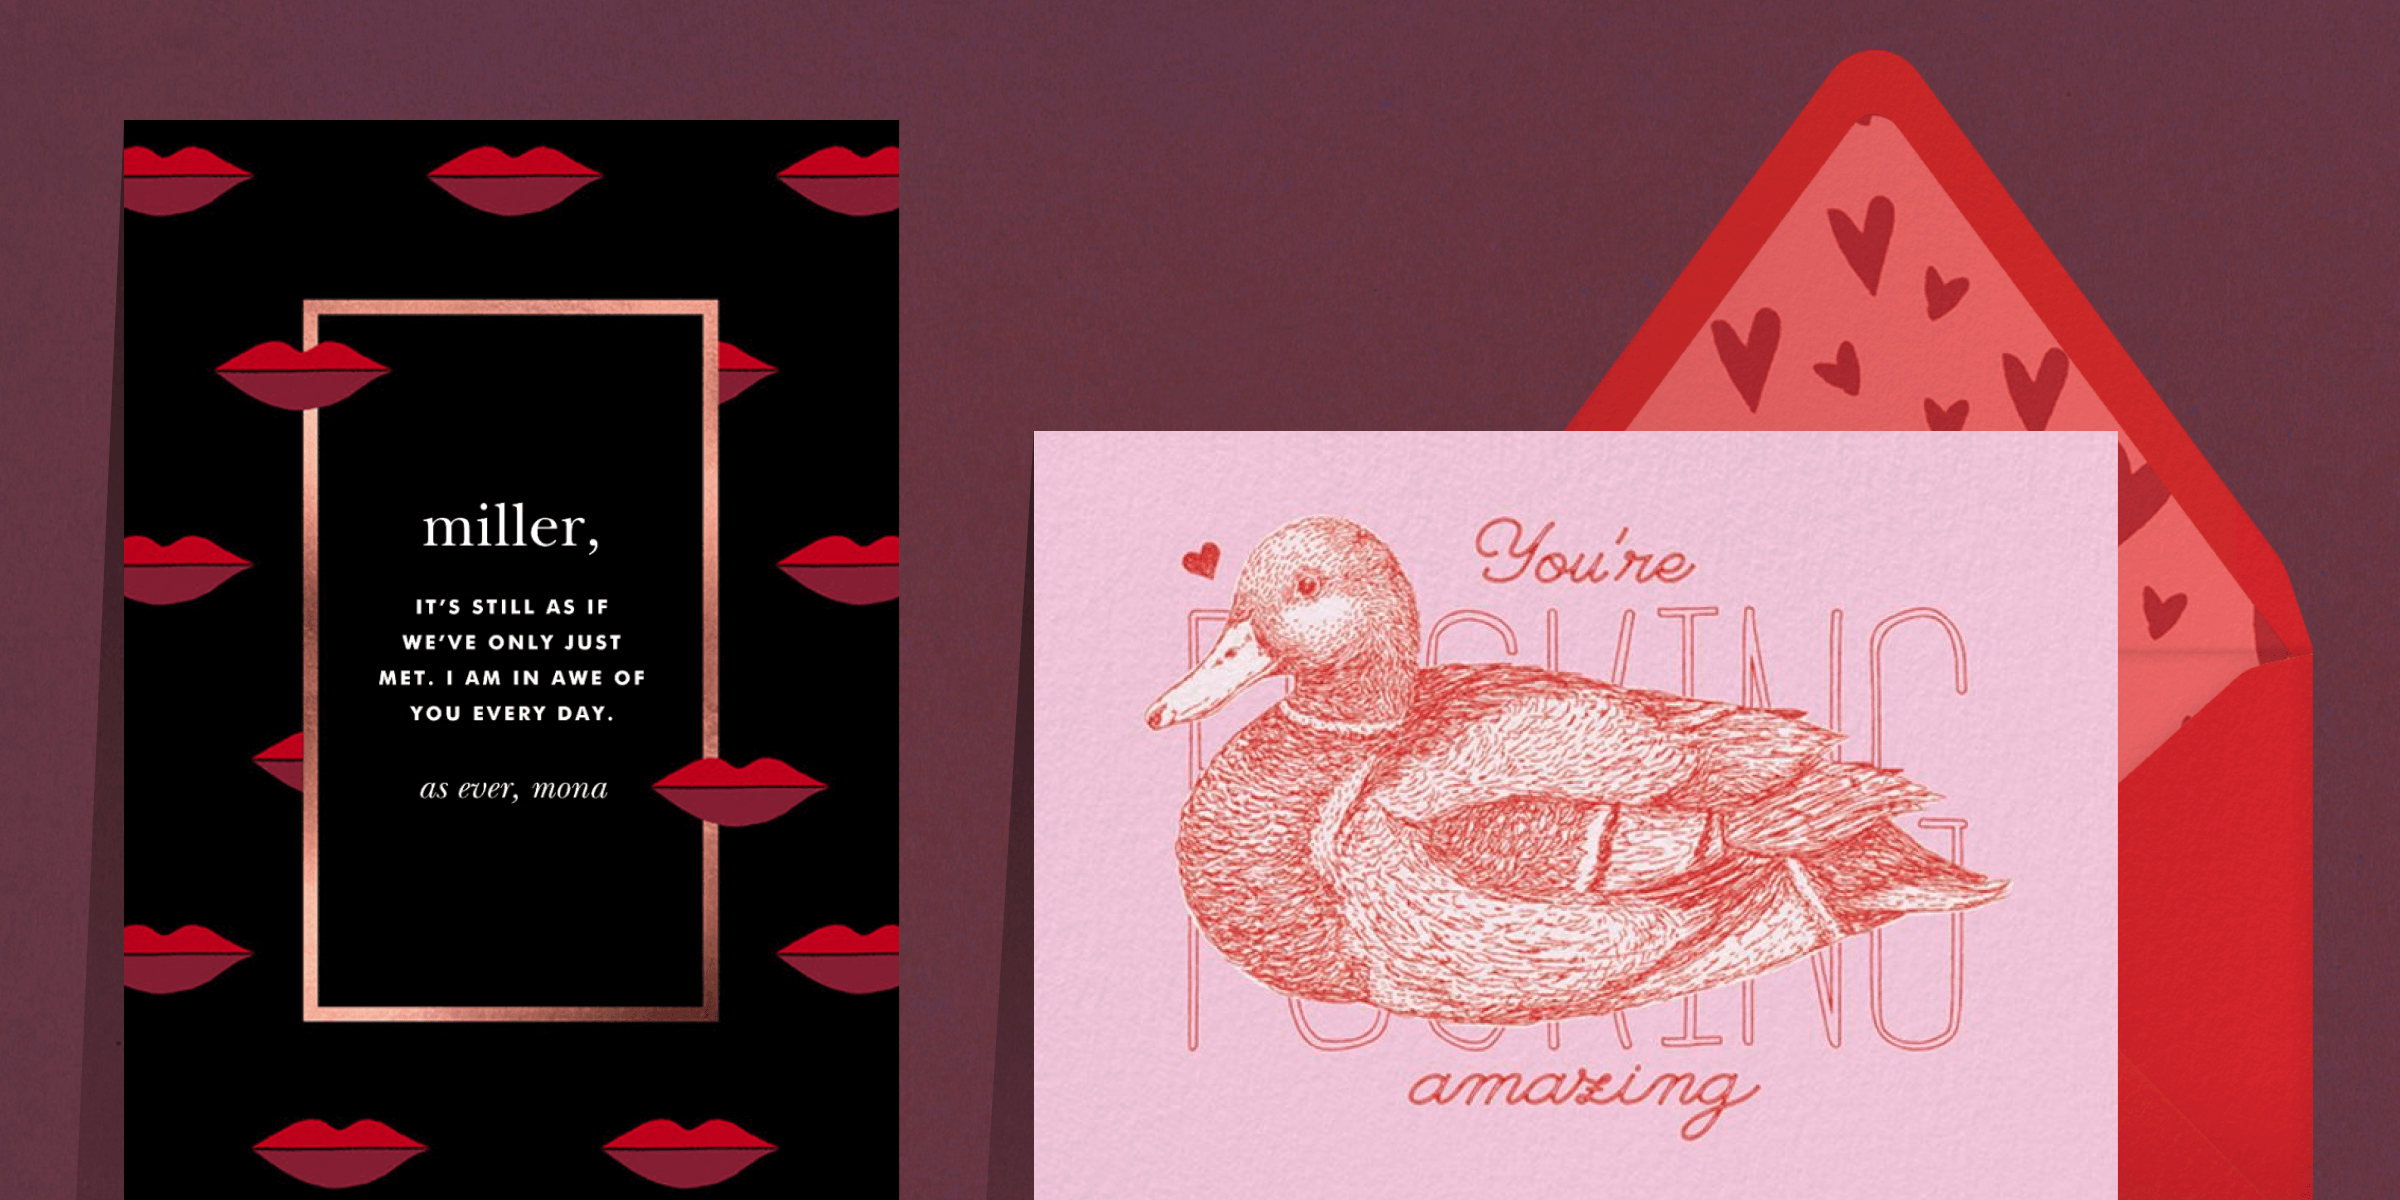 Two side-by-side Valentine’s Day cards. Left - A black card with illustrated red lips printed all over with room for a message in the middle. Right - A pink horizontal card with an illustration of a duck partially covering over a possibly explicit phrase that rhymes with “you’re ducking amazing.” It’s paired with a red envelope with a pink and red hearts liner.